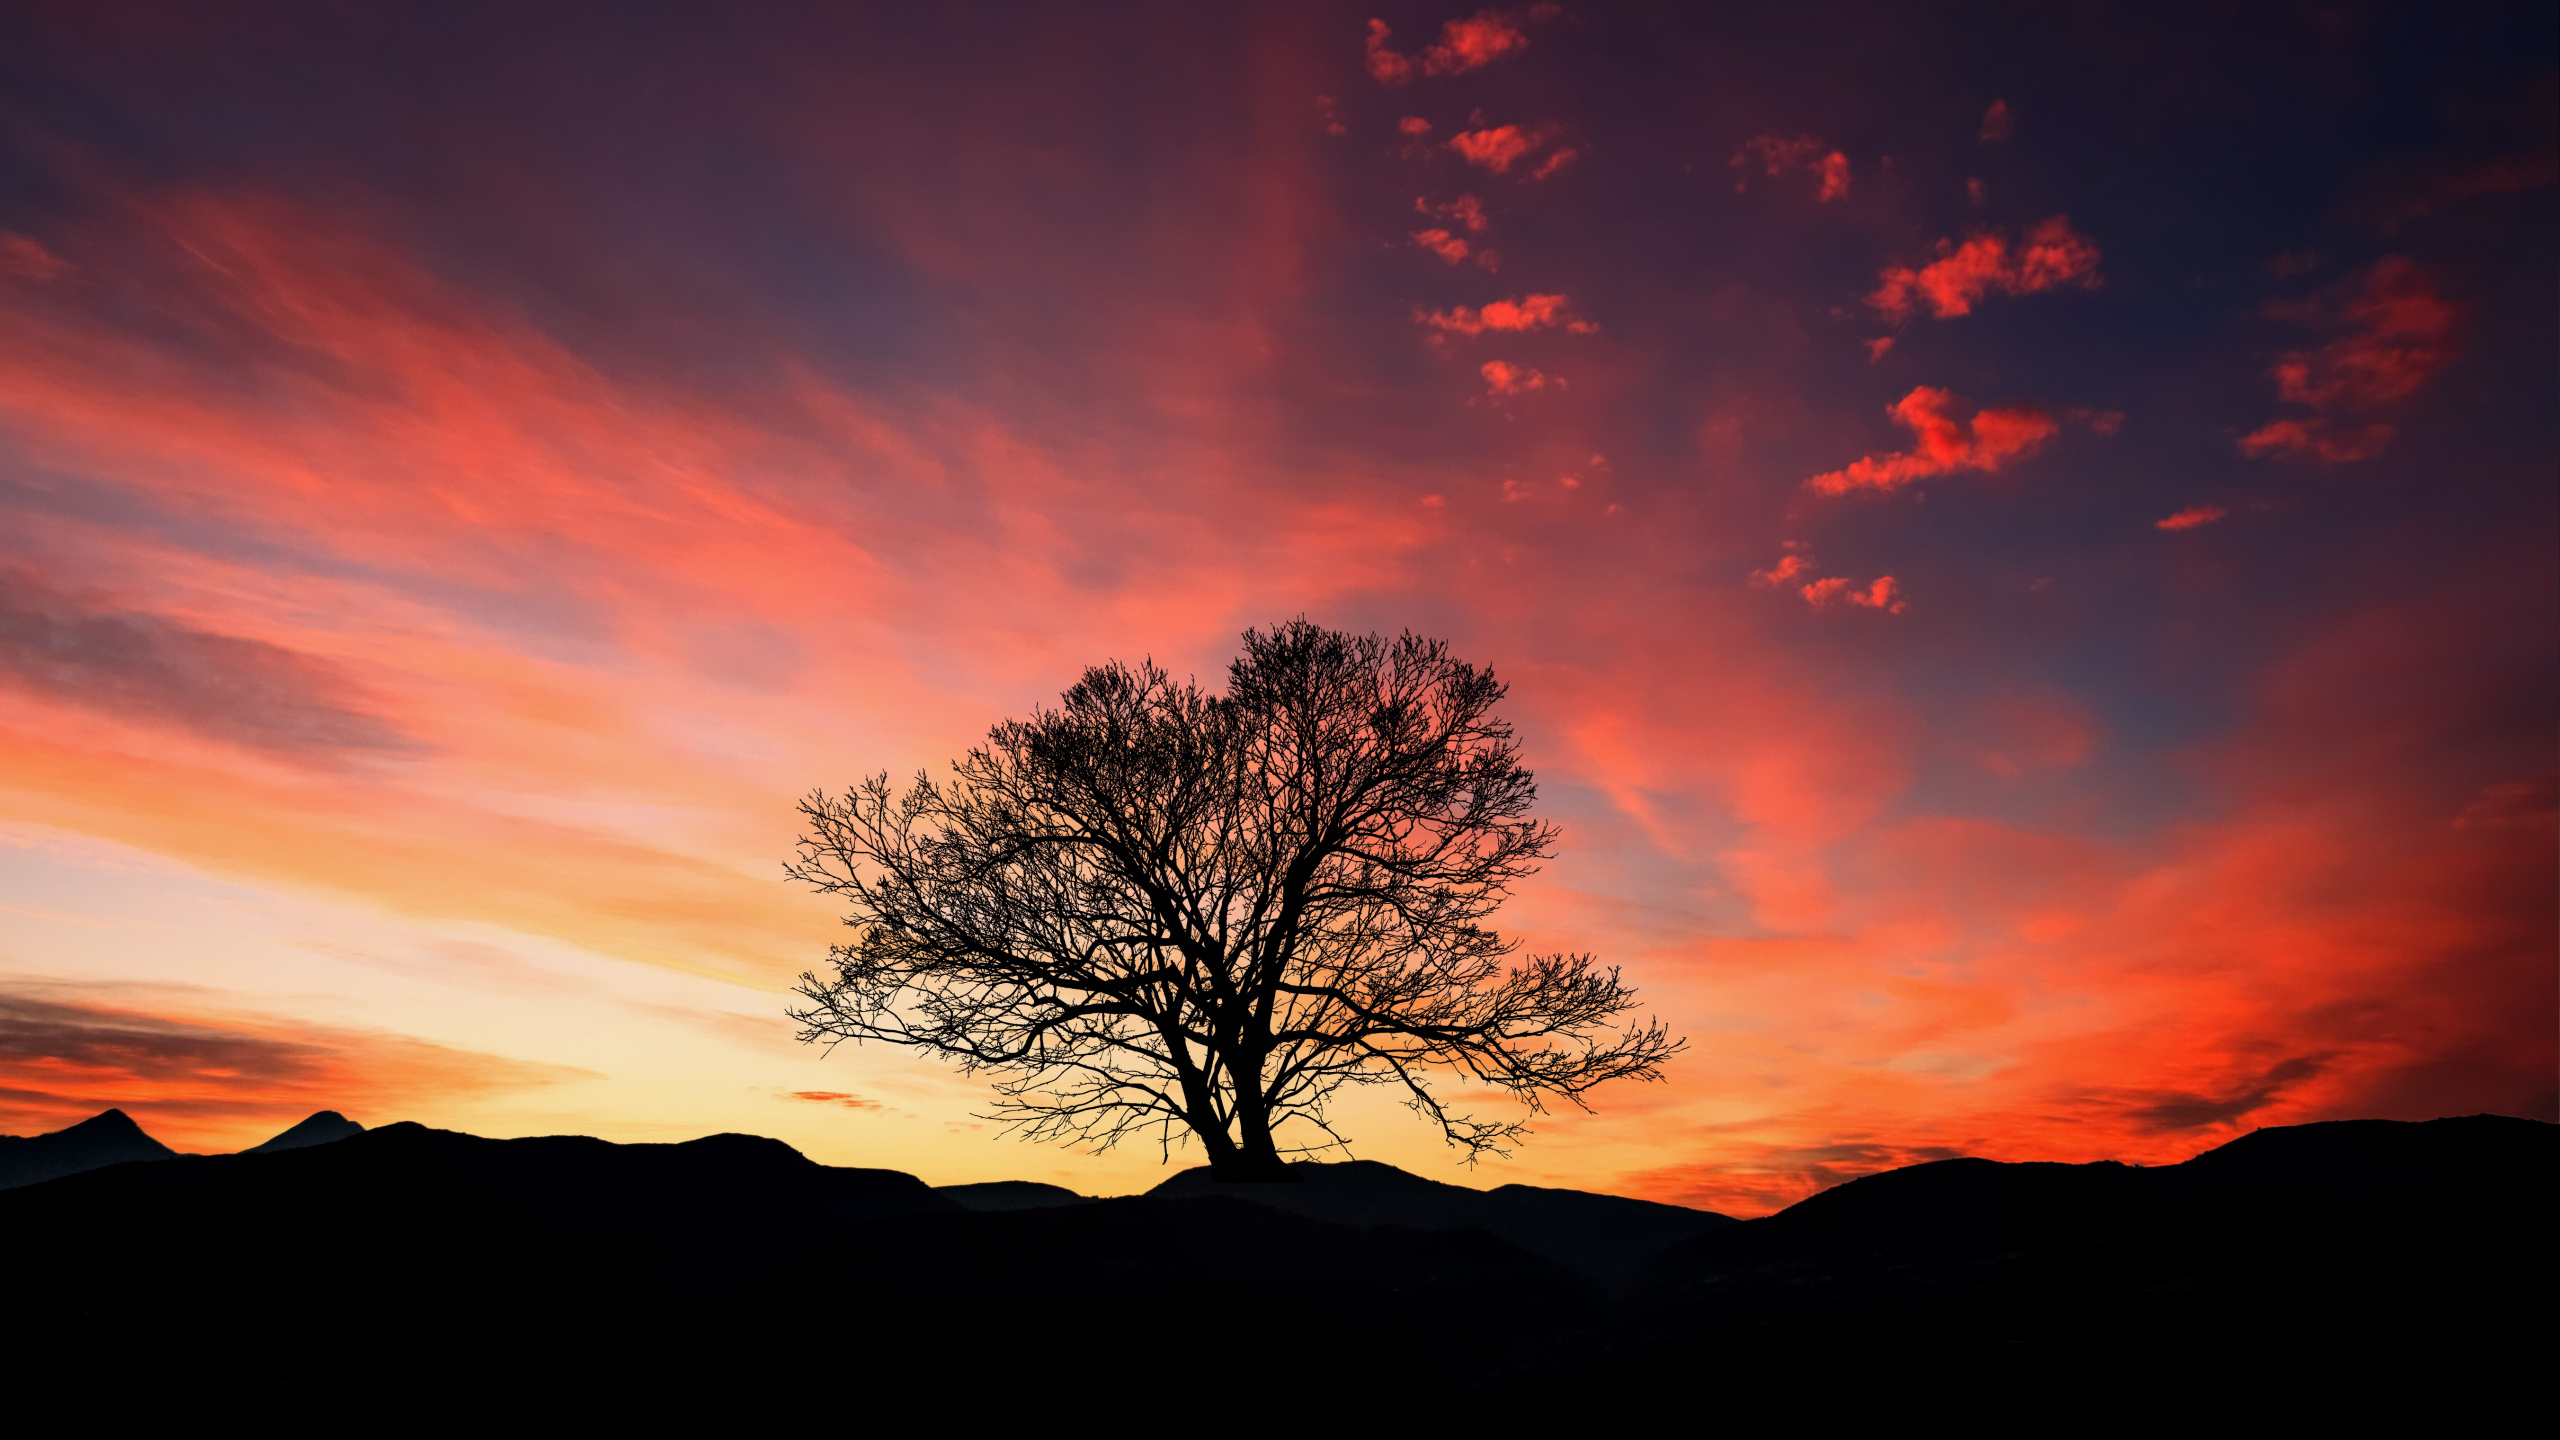 Silhouette of Bare Tree During Sunset. Wallpaper in 2560x1440 Resolution